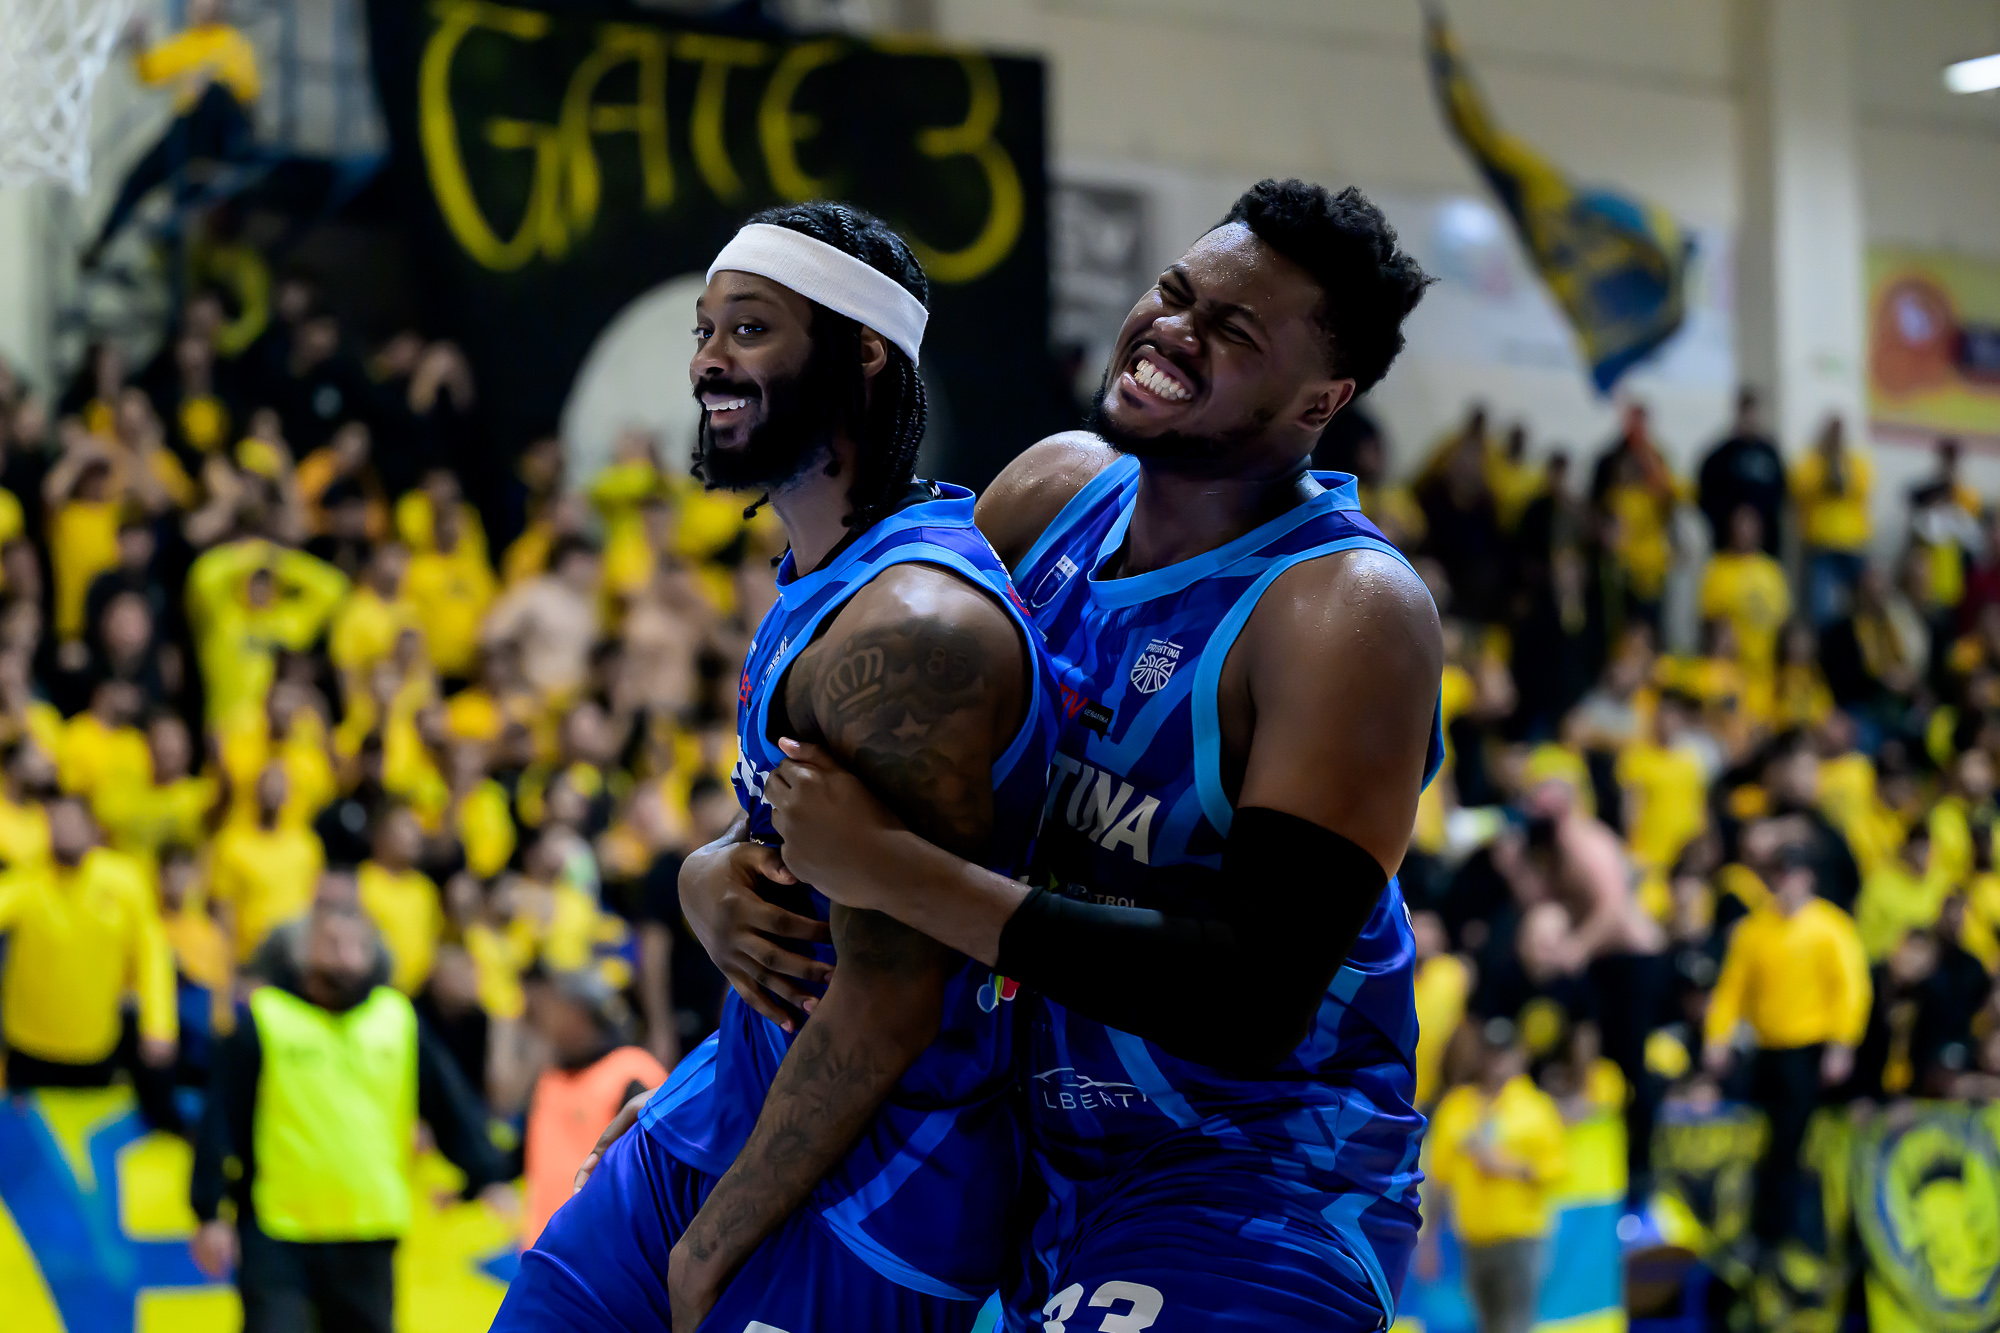 Sigal Prishtina stole a win from AEL after a late dagger by Donte Clark